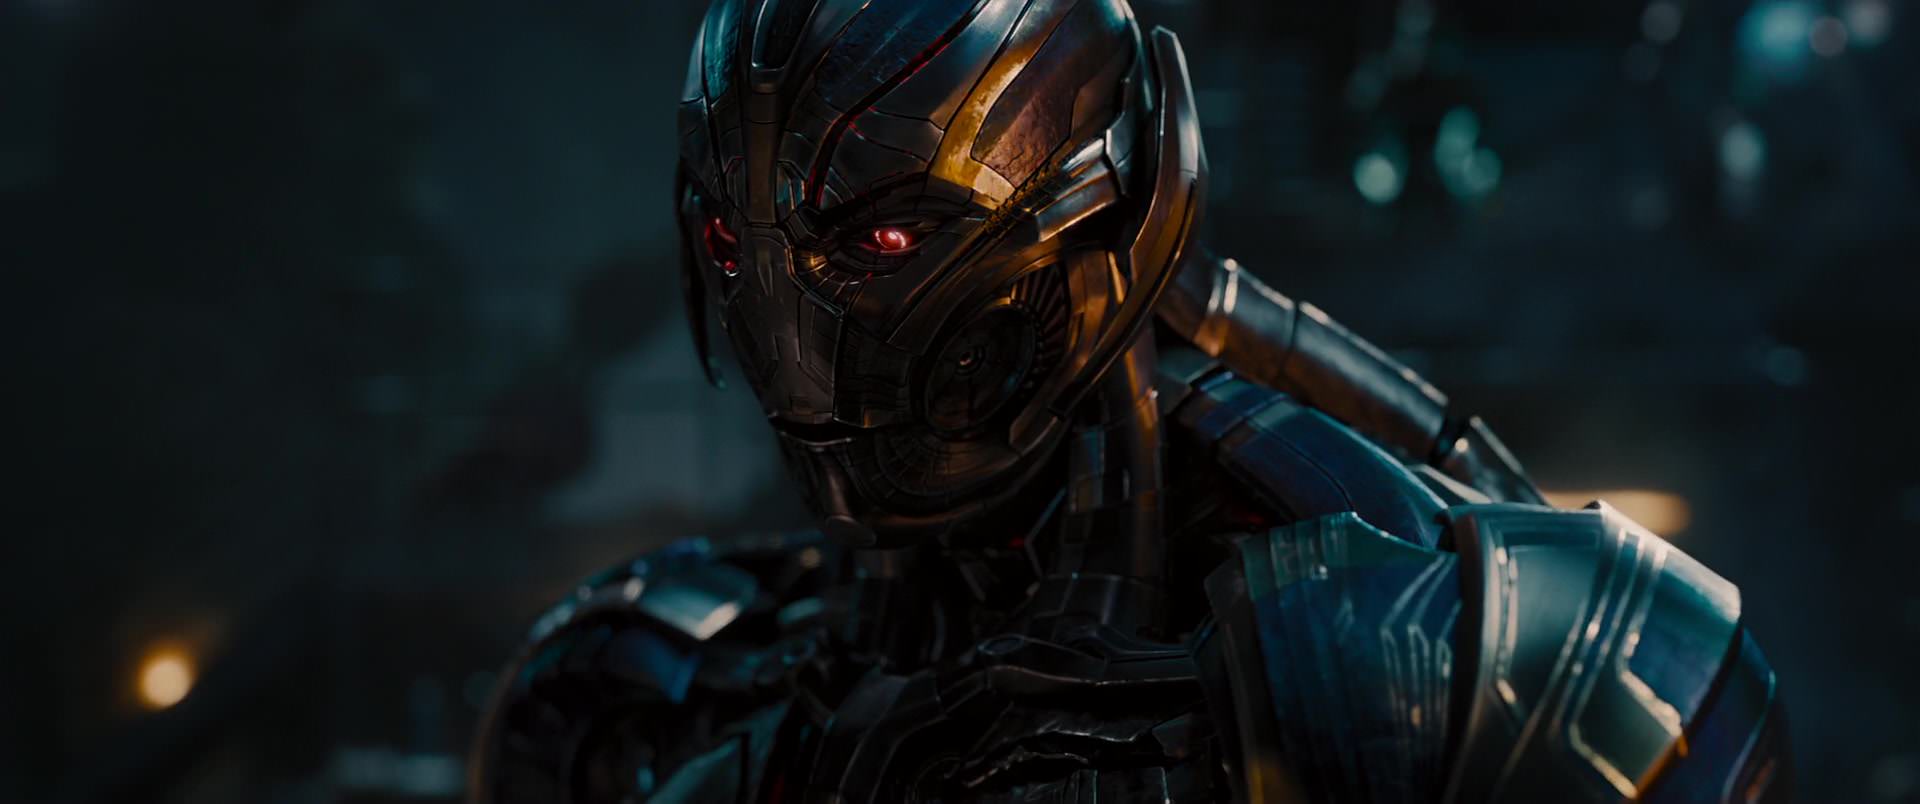 avengers age of ultron full movie in hindi download mp4moviez